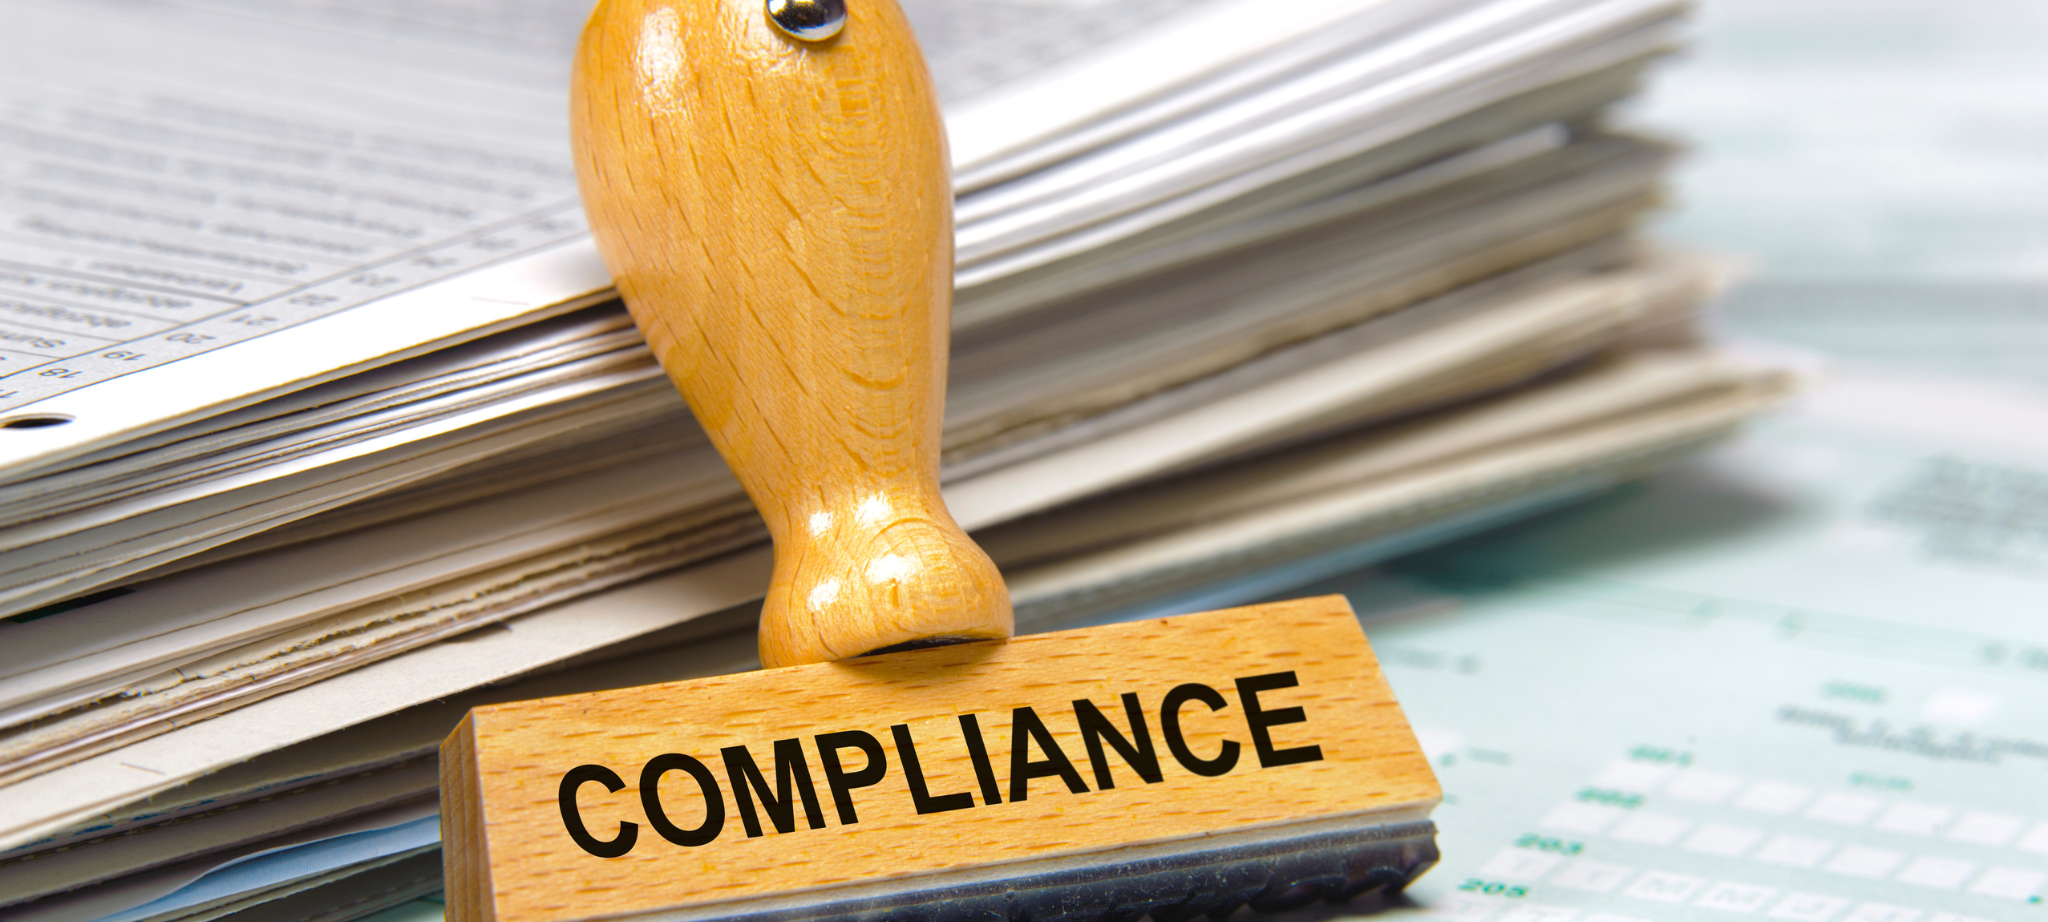 Corporate Compliance Training: 12 Best Practices